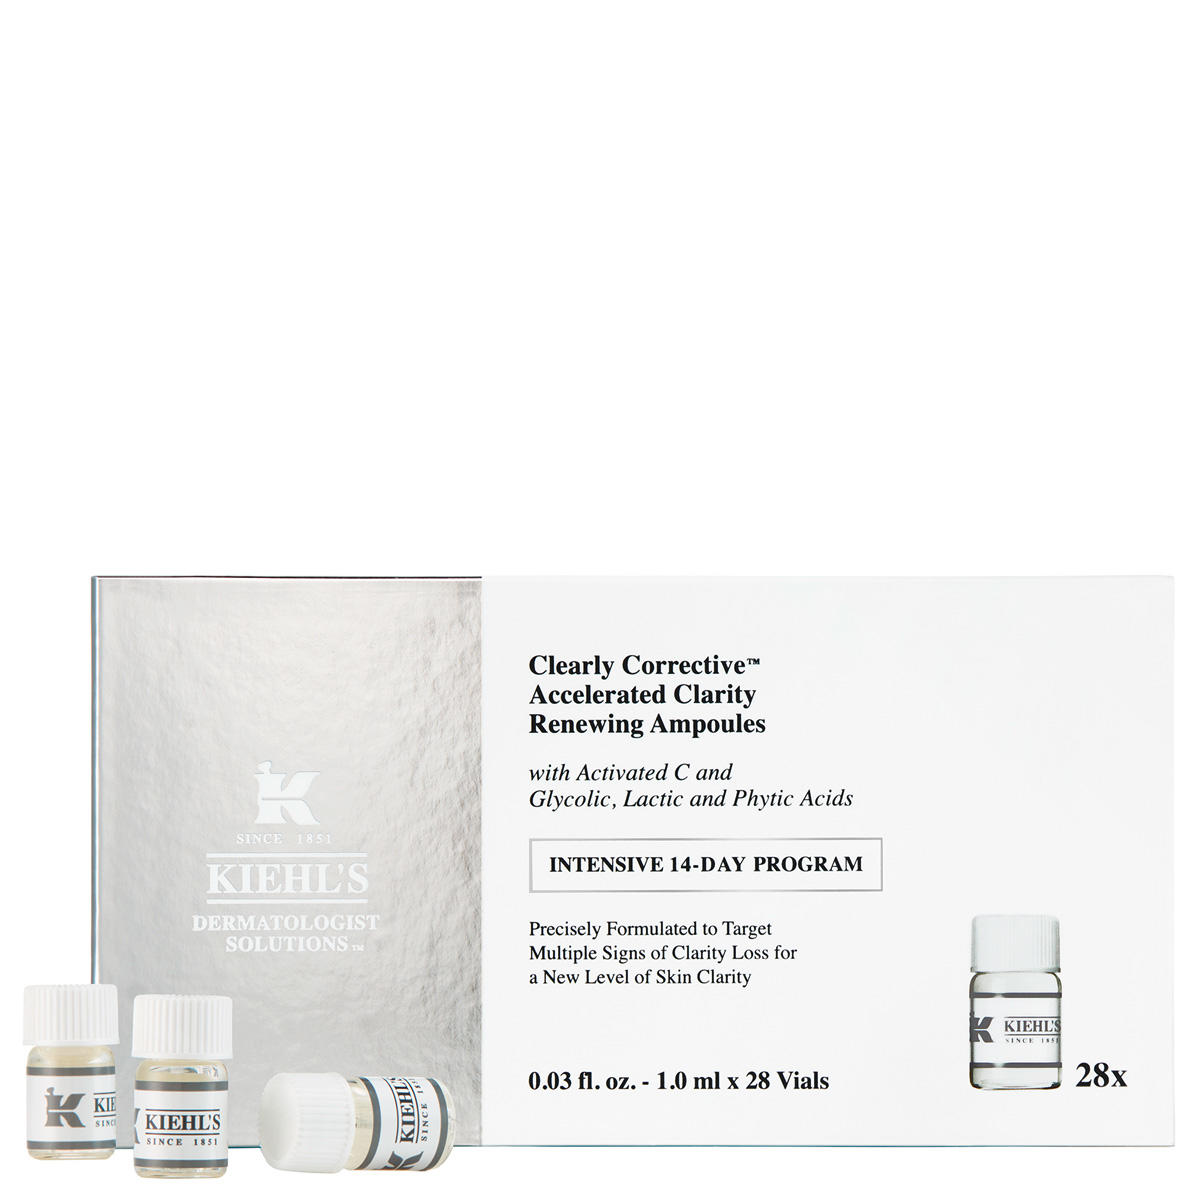 Kiehl's Clearly Corrective™ Accelerated Clarity Renewing Ampoules 28 x 1 ml - 1